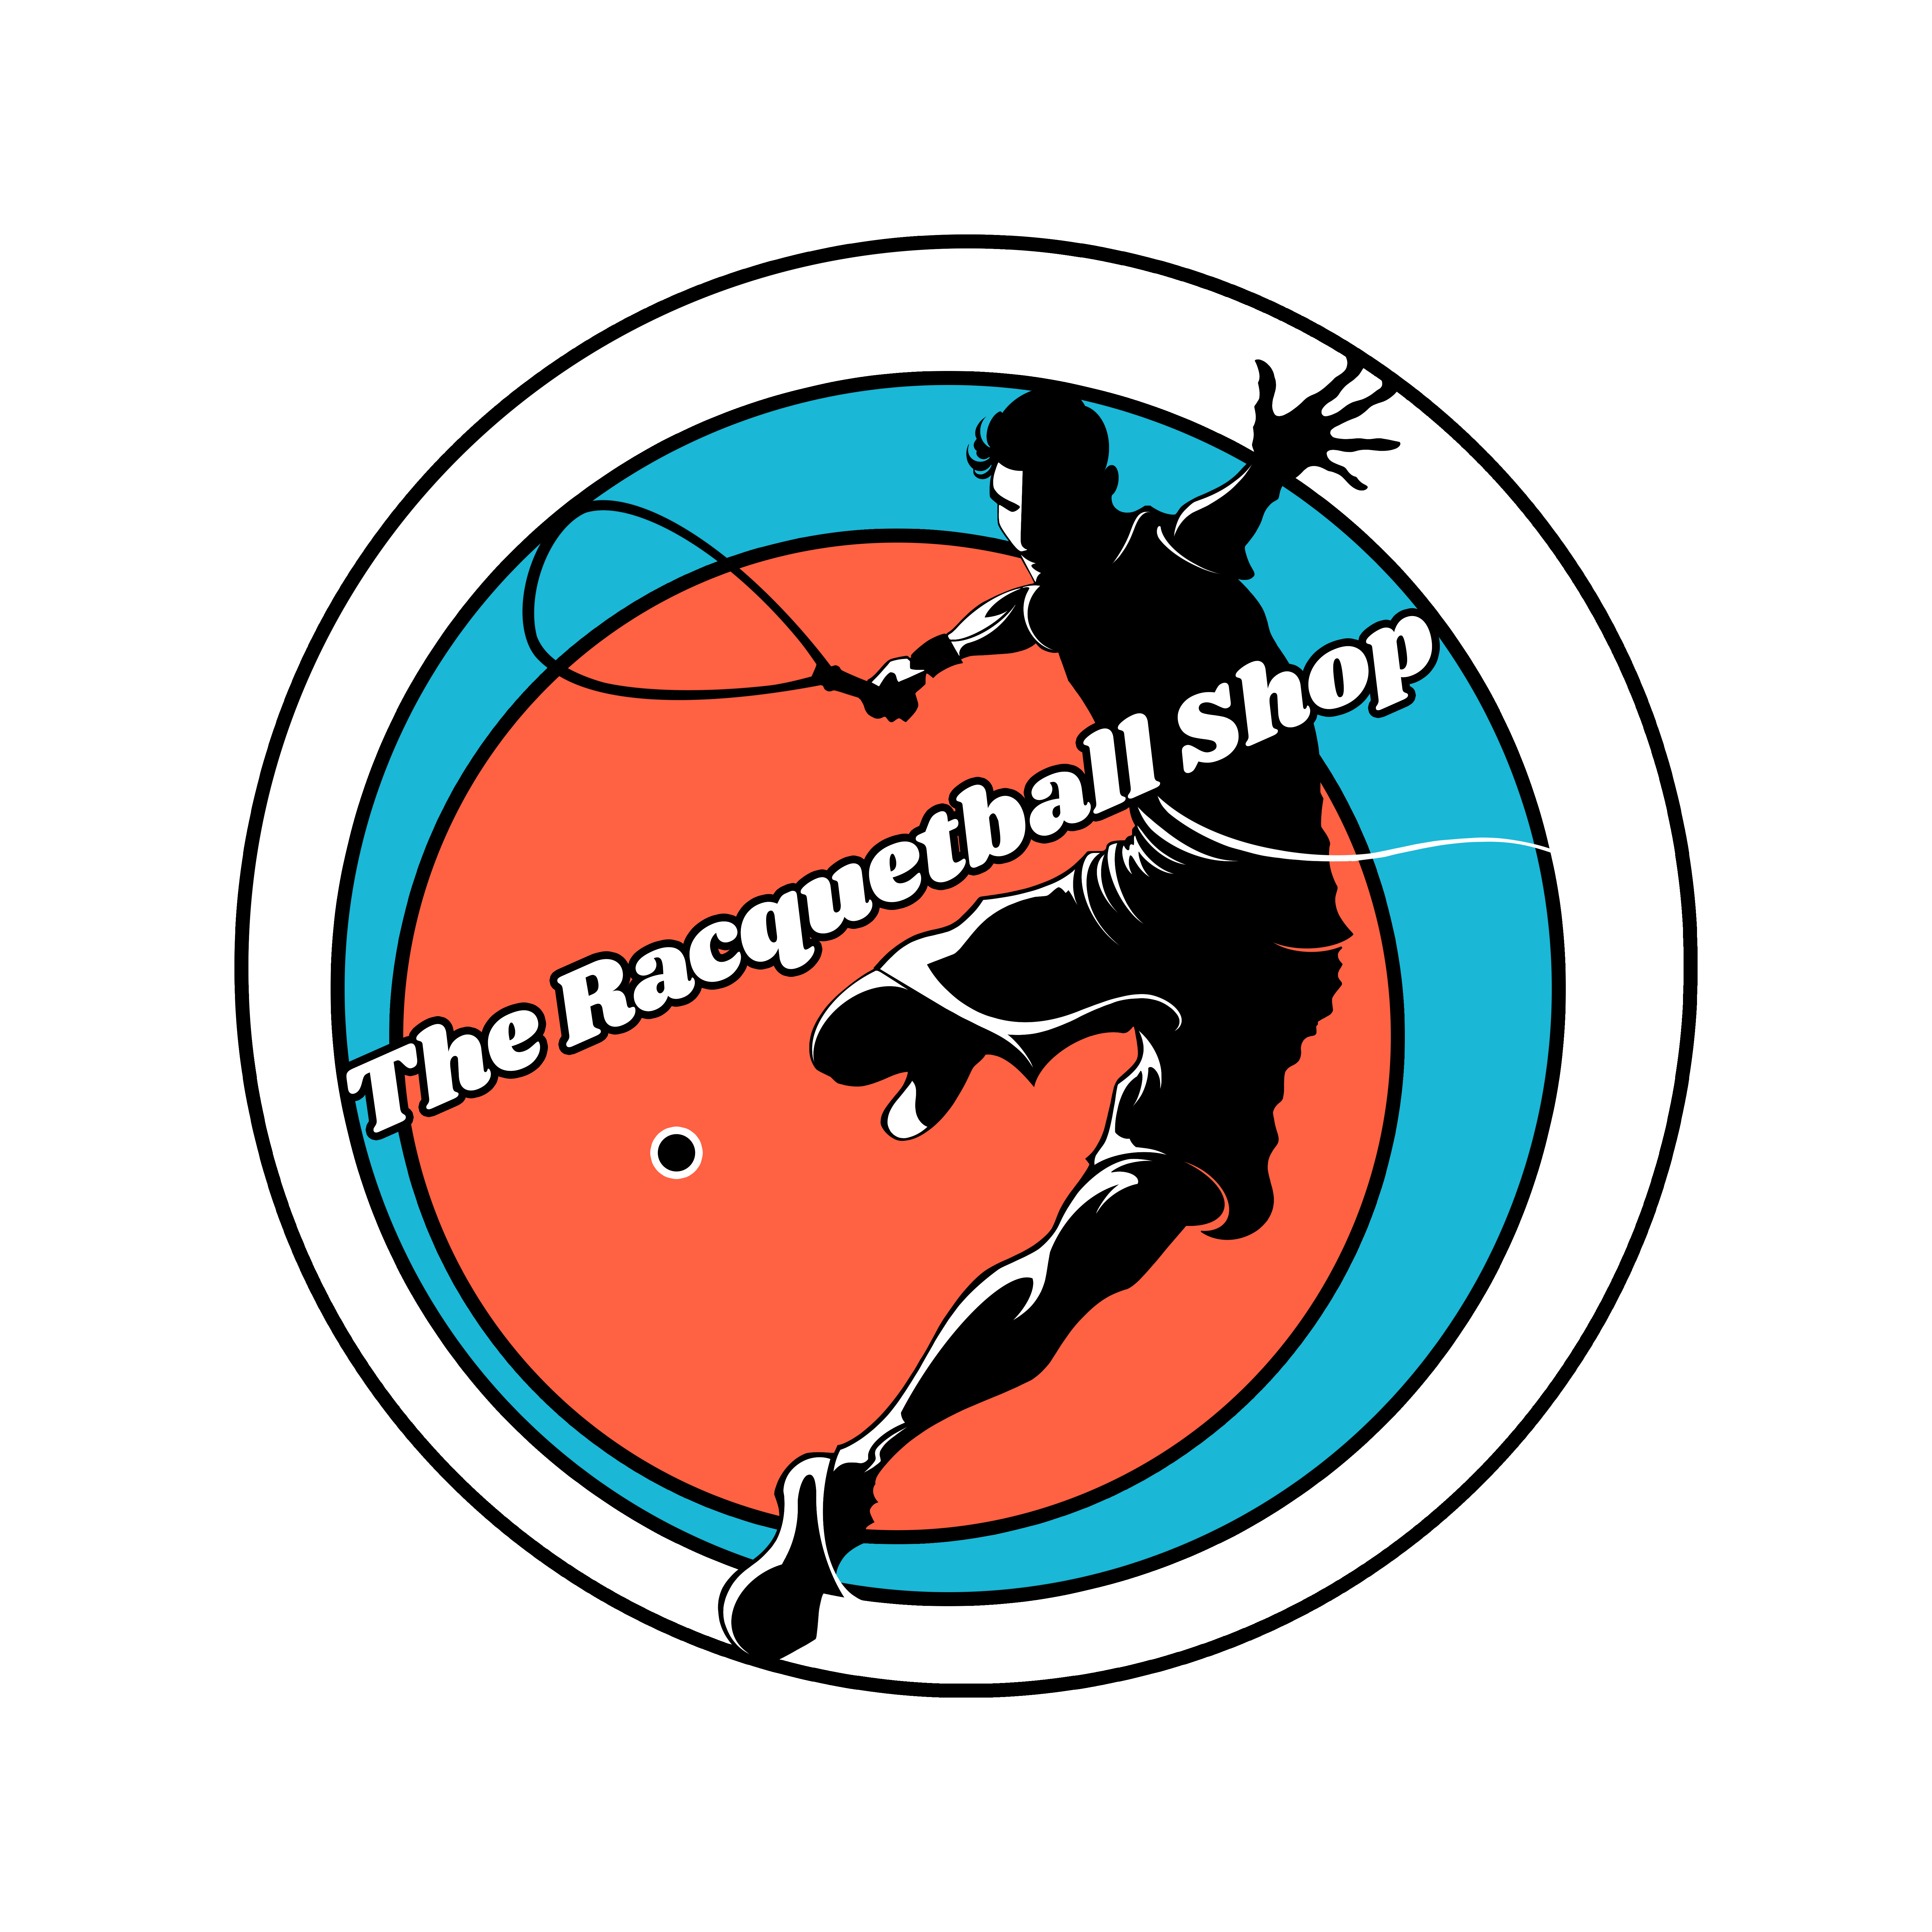 The Racquetball Shop.ie